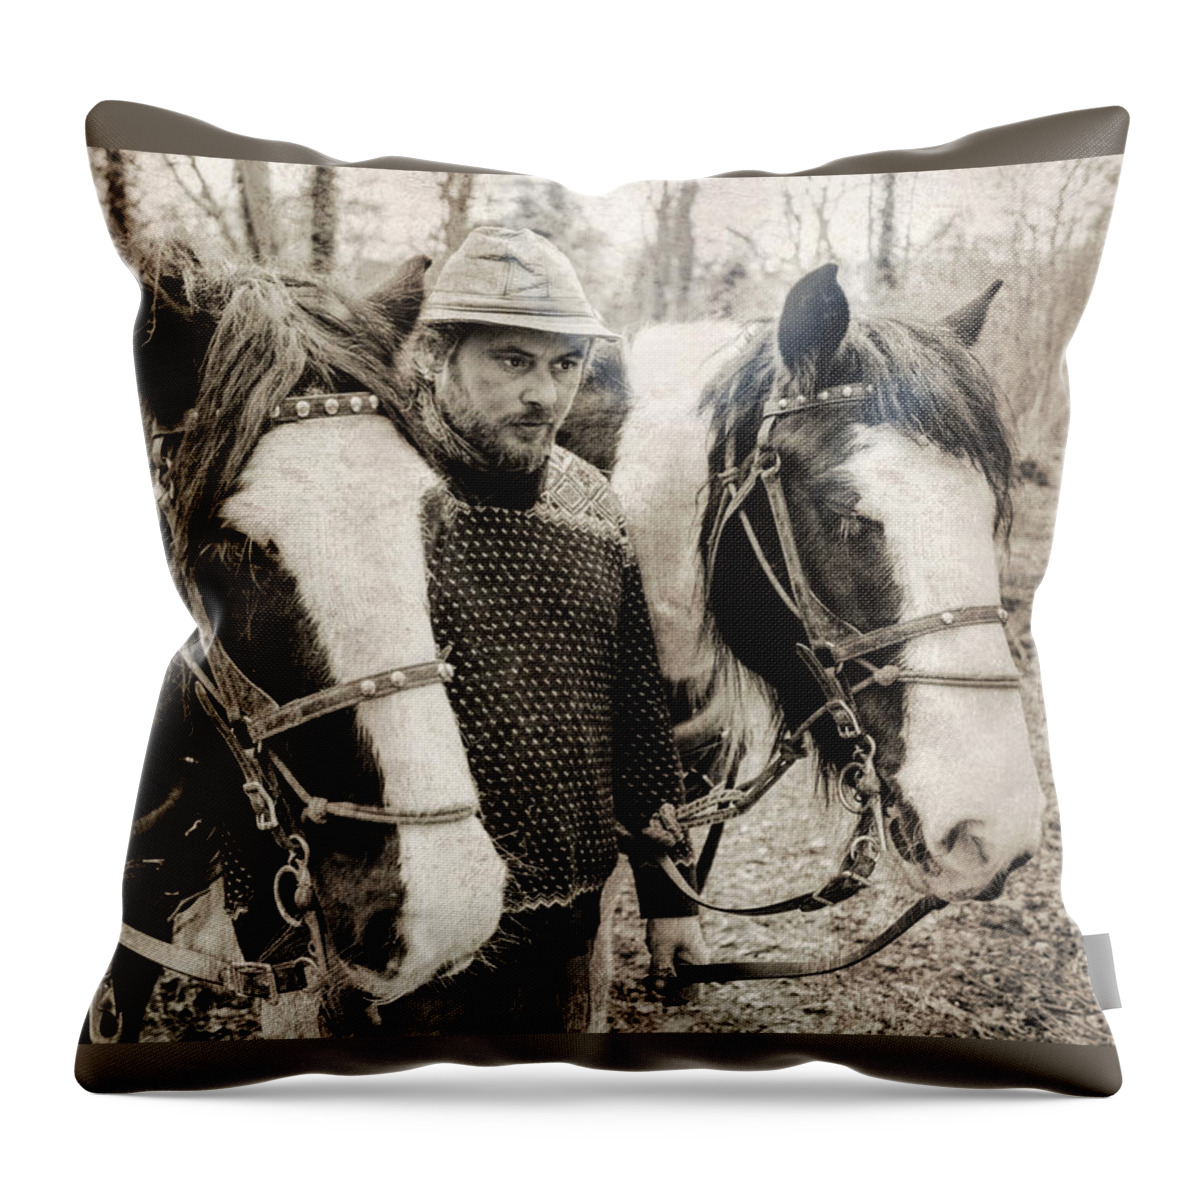 Action Throw Pillow featuring the photograph Horse Work Team 3 by Roy Pedersen